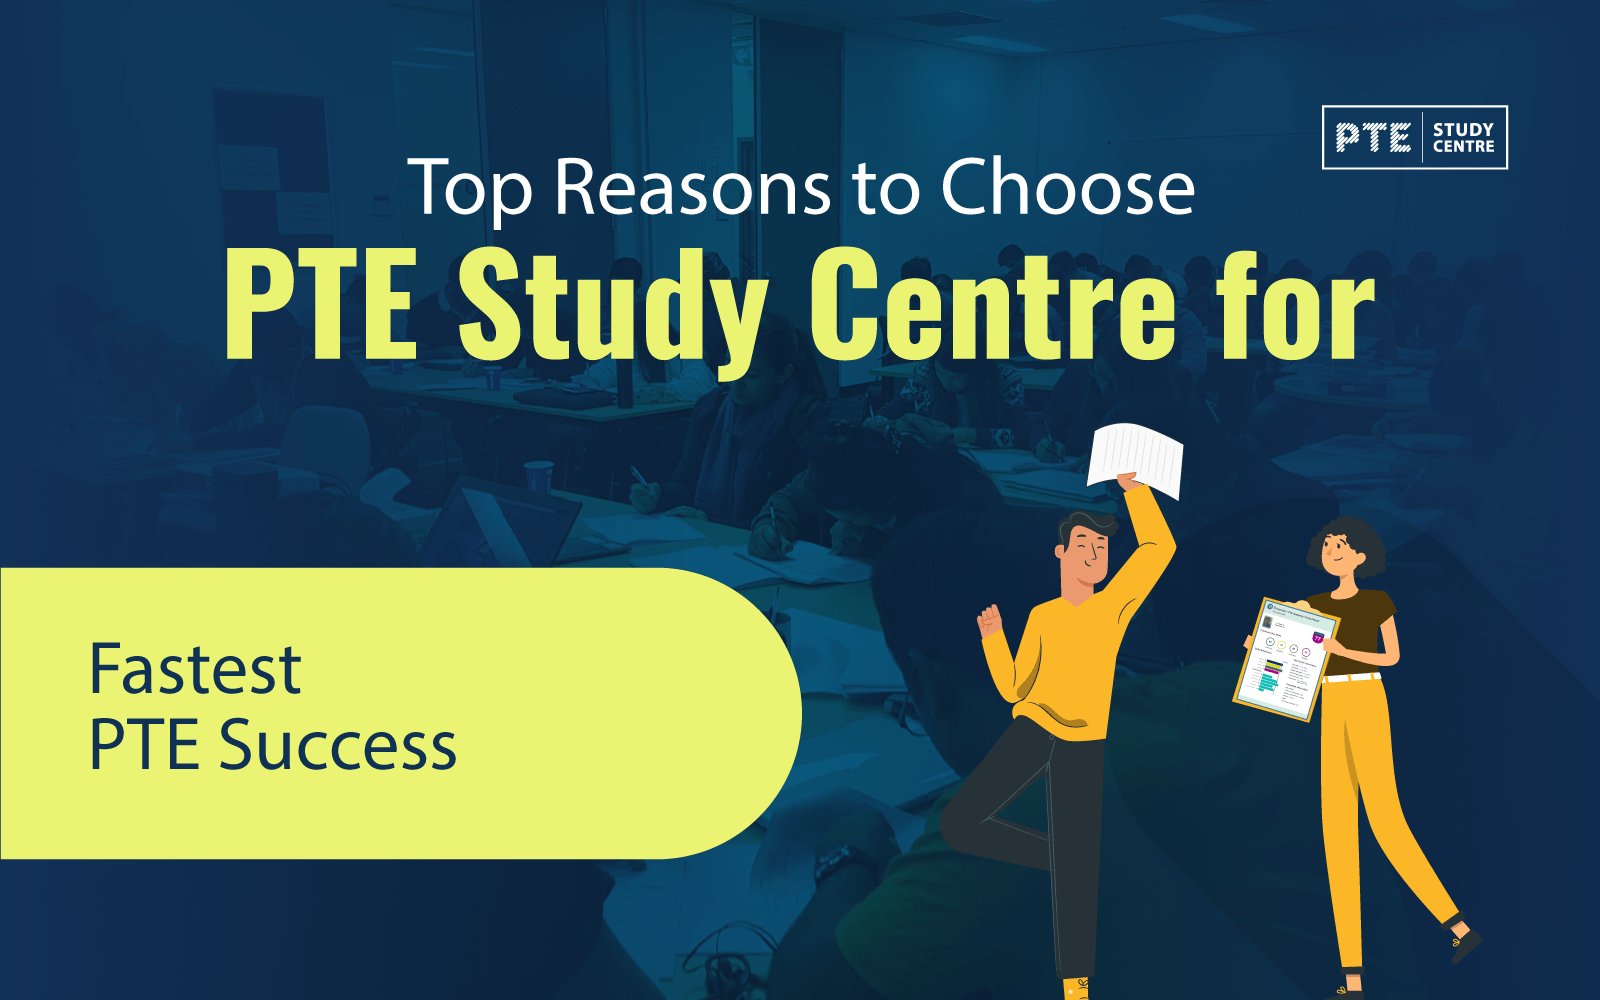 Top Reasons to Choose PTE Study Centre for Fastest PTE Success